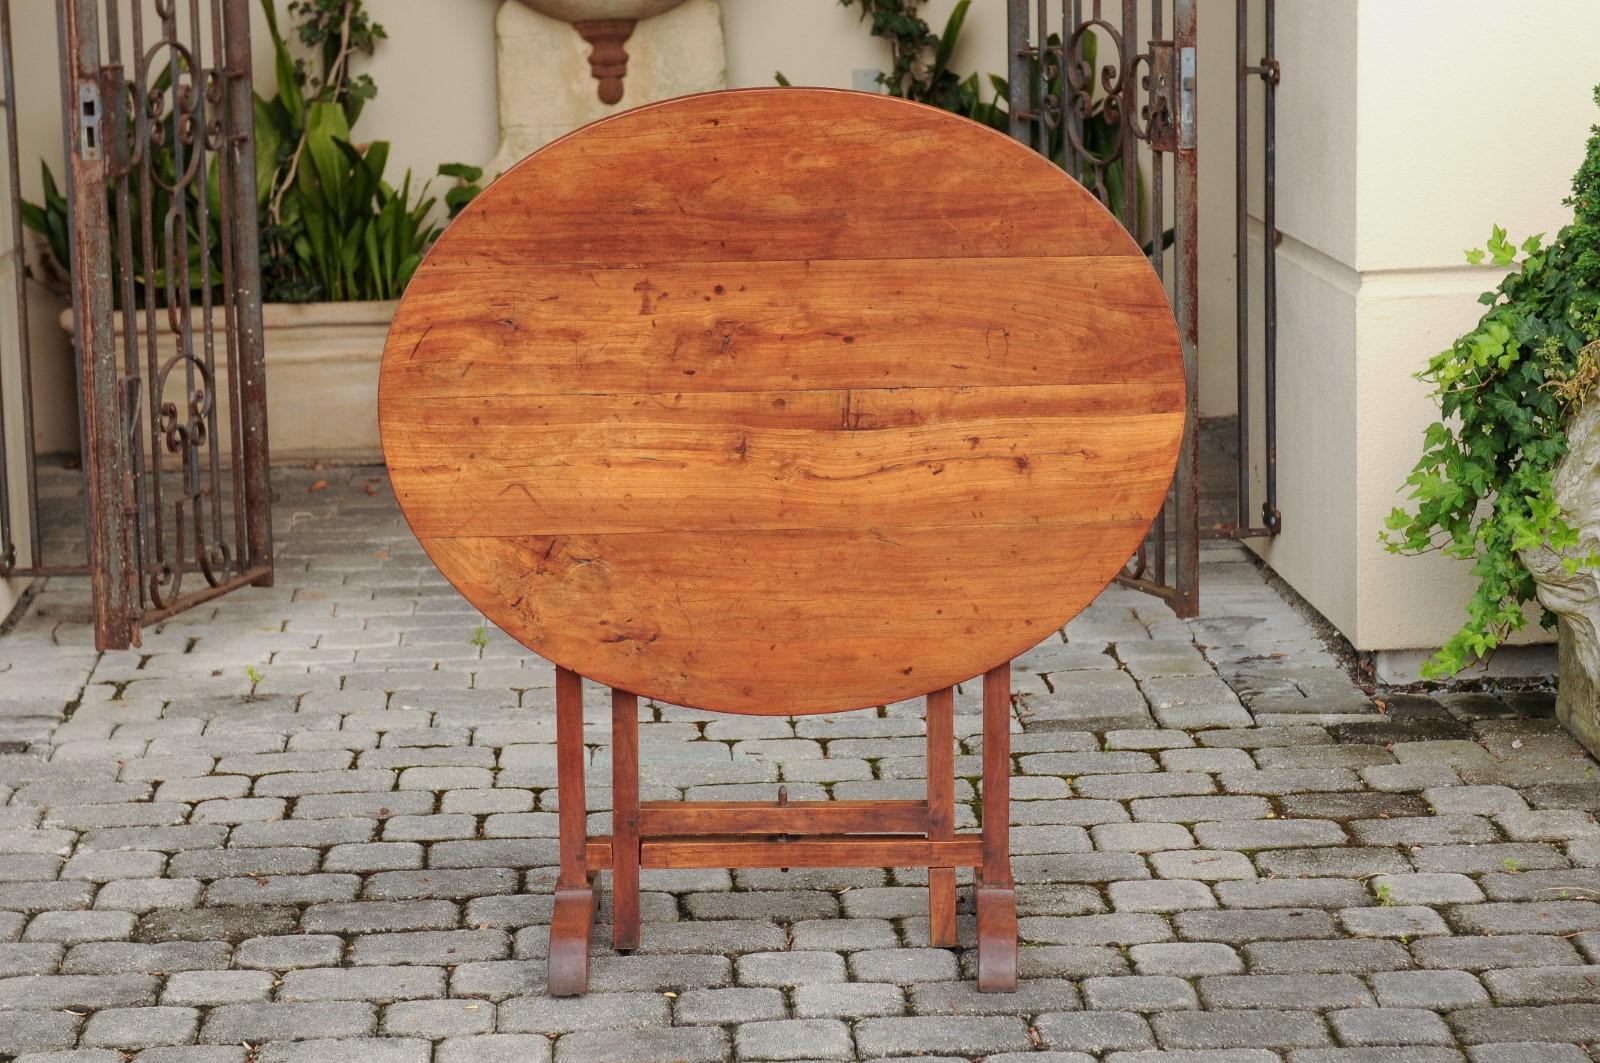 A French fruitwood wine tasting table from the late 19th century, with oval top and trestle base. Born in France during the later years of the politically dynamic 19th century, this fruitwood wine tasting table features an oval planked tilt-top ,